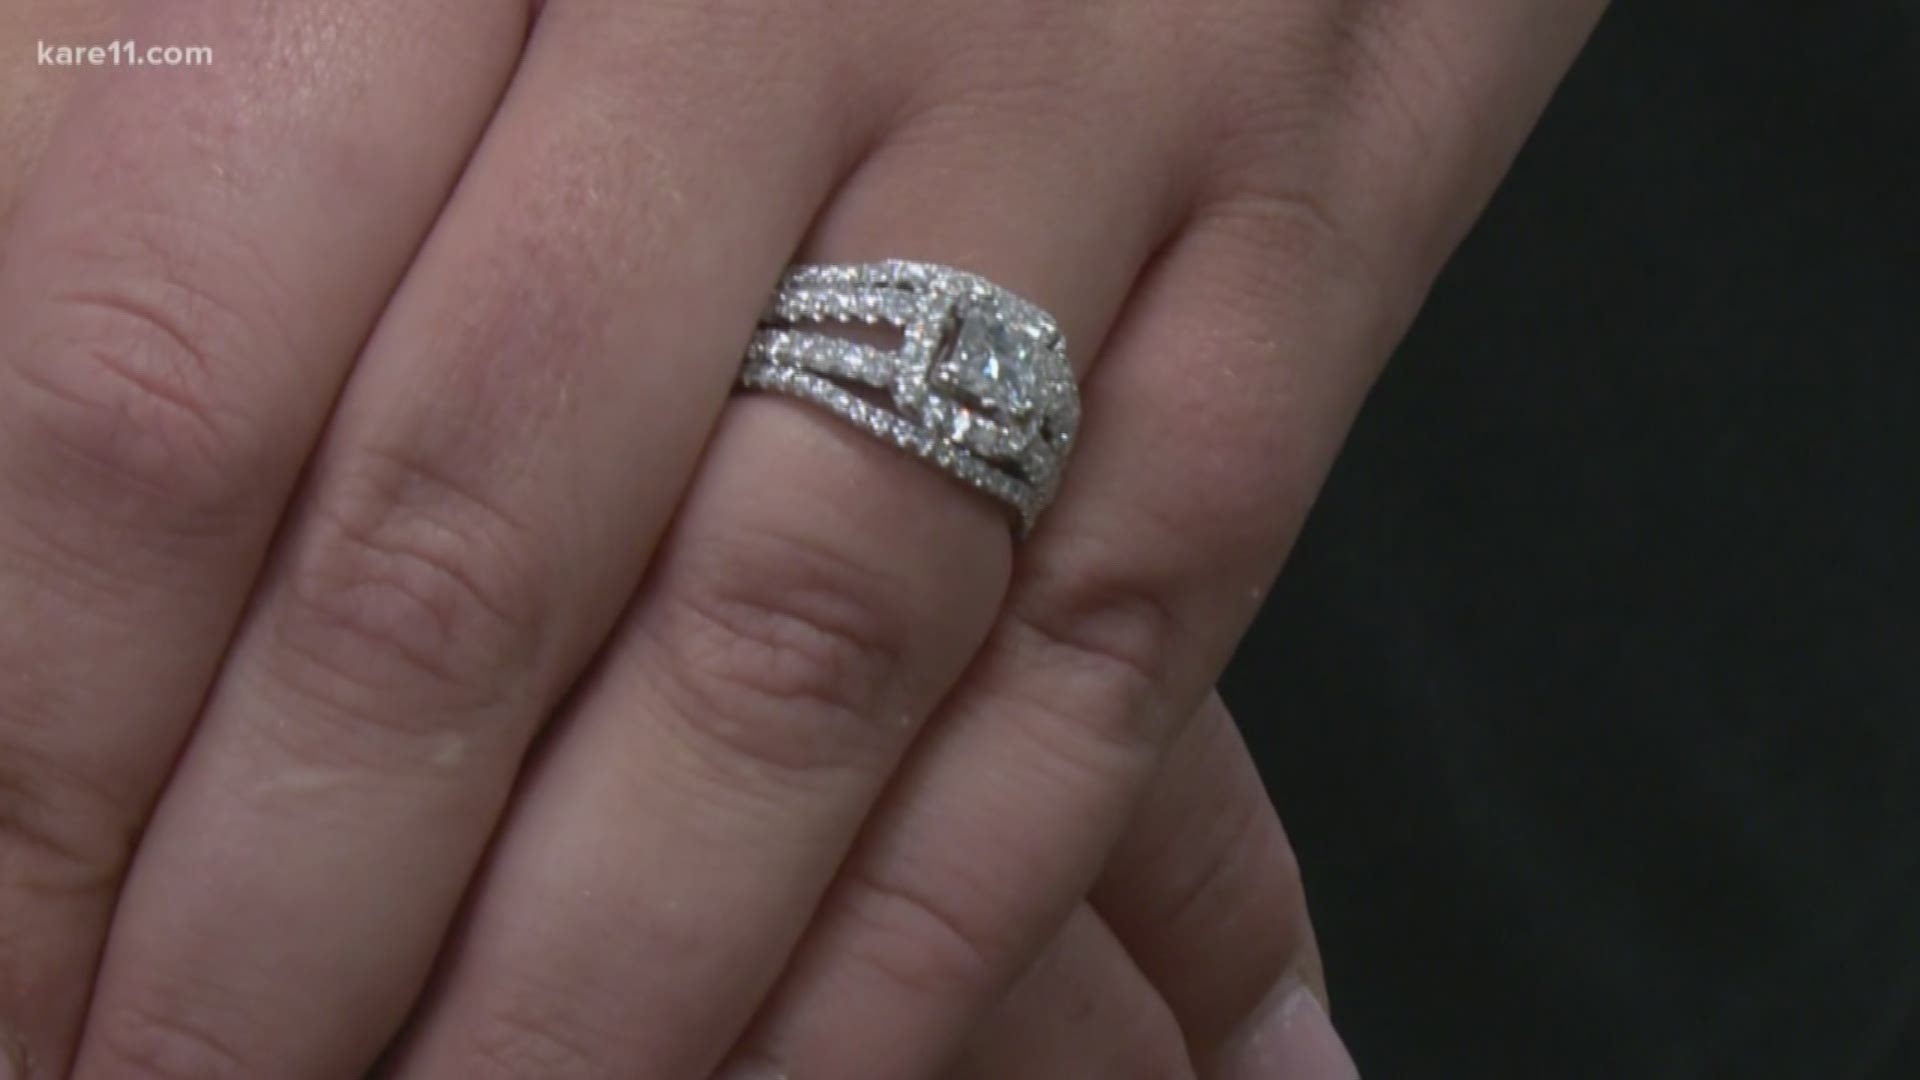 A Big Lake woman's wedding ring was lost down the drain about a year ago. It took some twists and turns - before it was found in the sewer system.